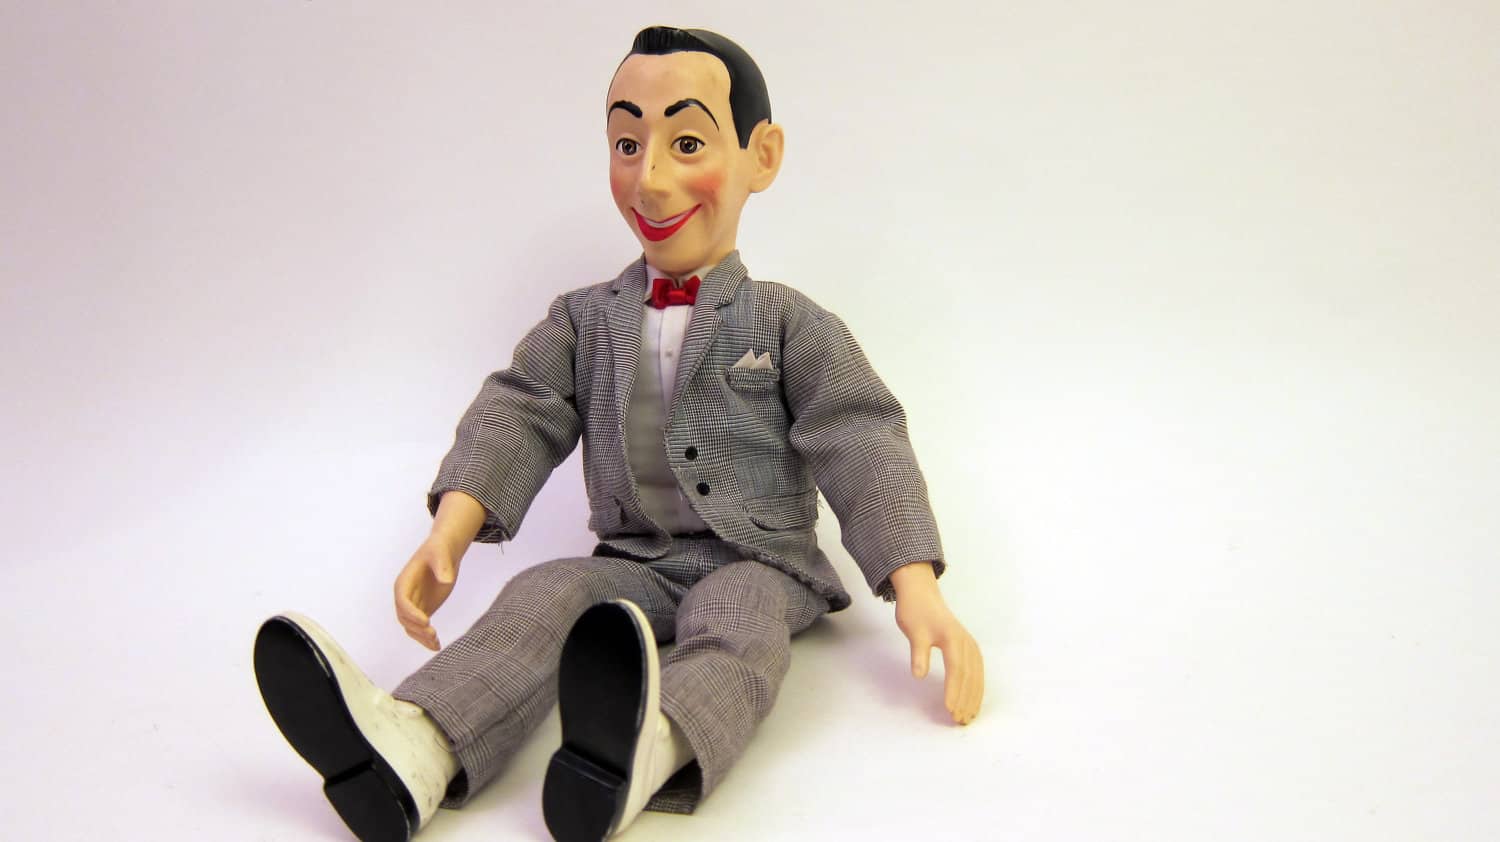 Talking Pee-Wee Herman Doll,Like many dolls of its time, the creep factor of this particular doll was easily noticed. Huge eyes, pale skin and an air that vaguely reminds you of the doll from the Saw franchise.